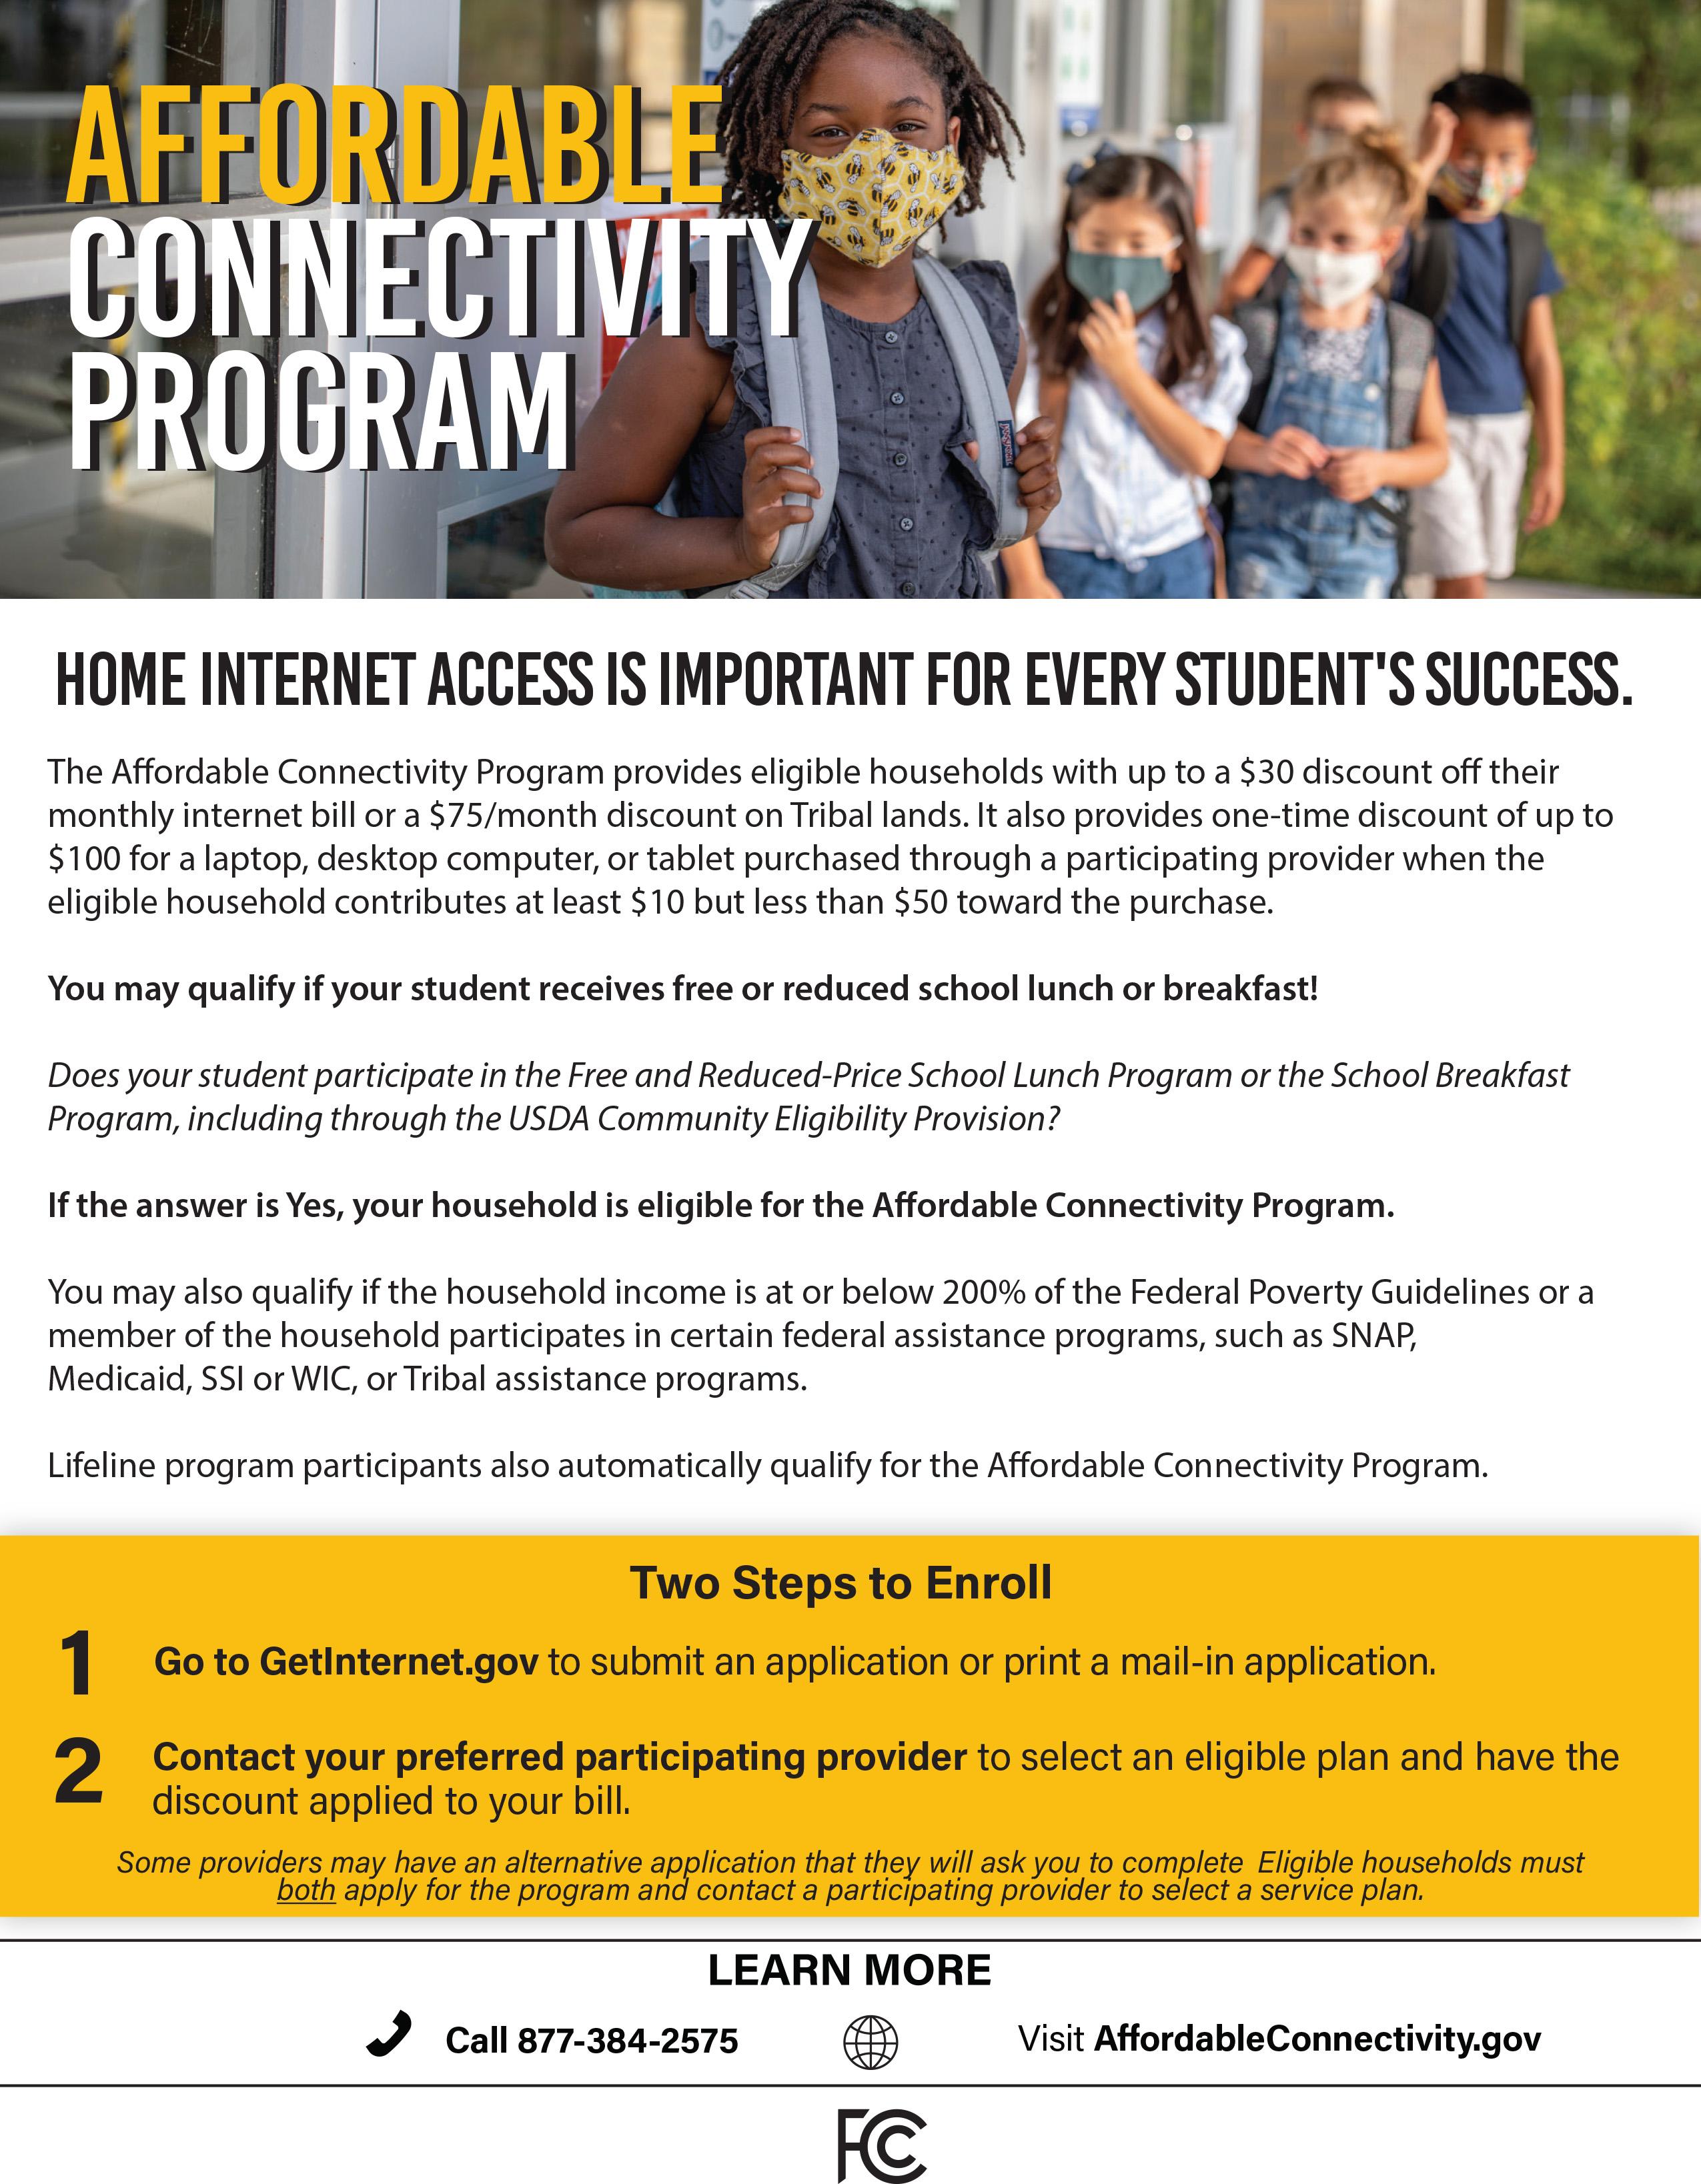 Affordable Connectivity Program provides eligible households with internet discount 